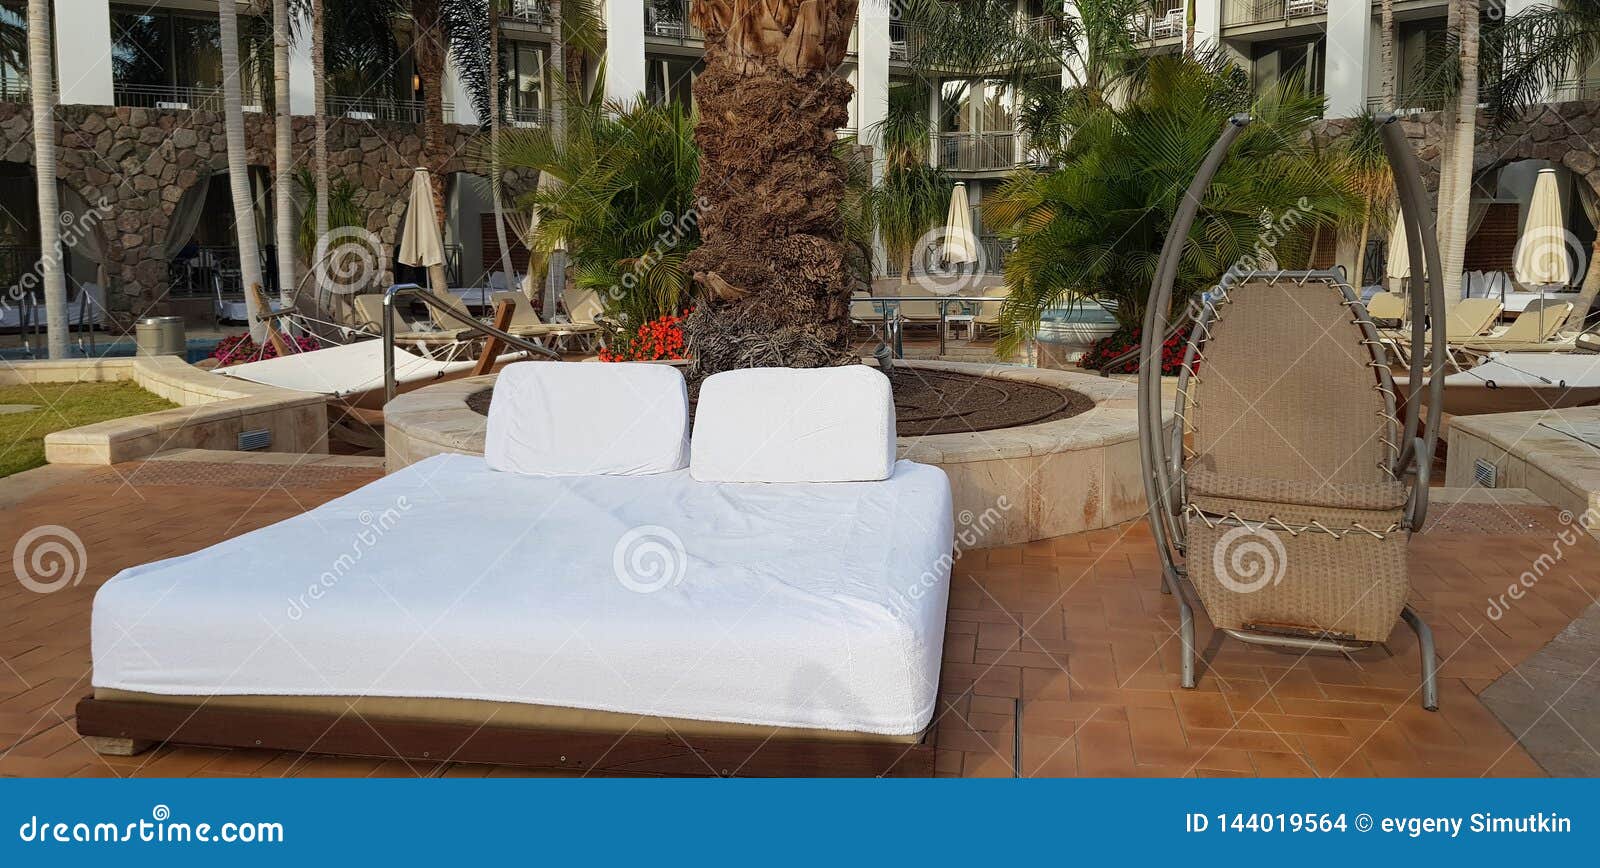 Bed For Tan And Rest With White Mattress Near A Rocking ...